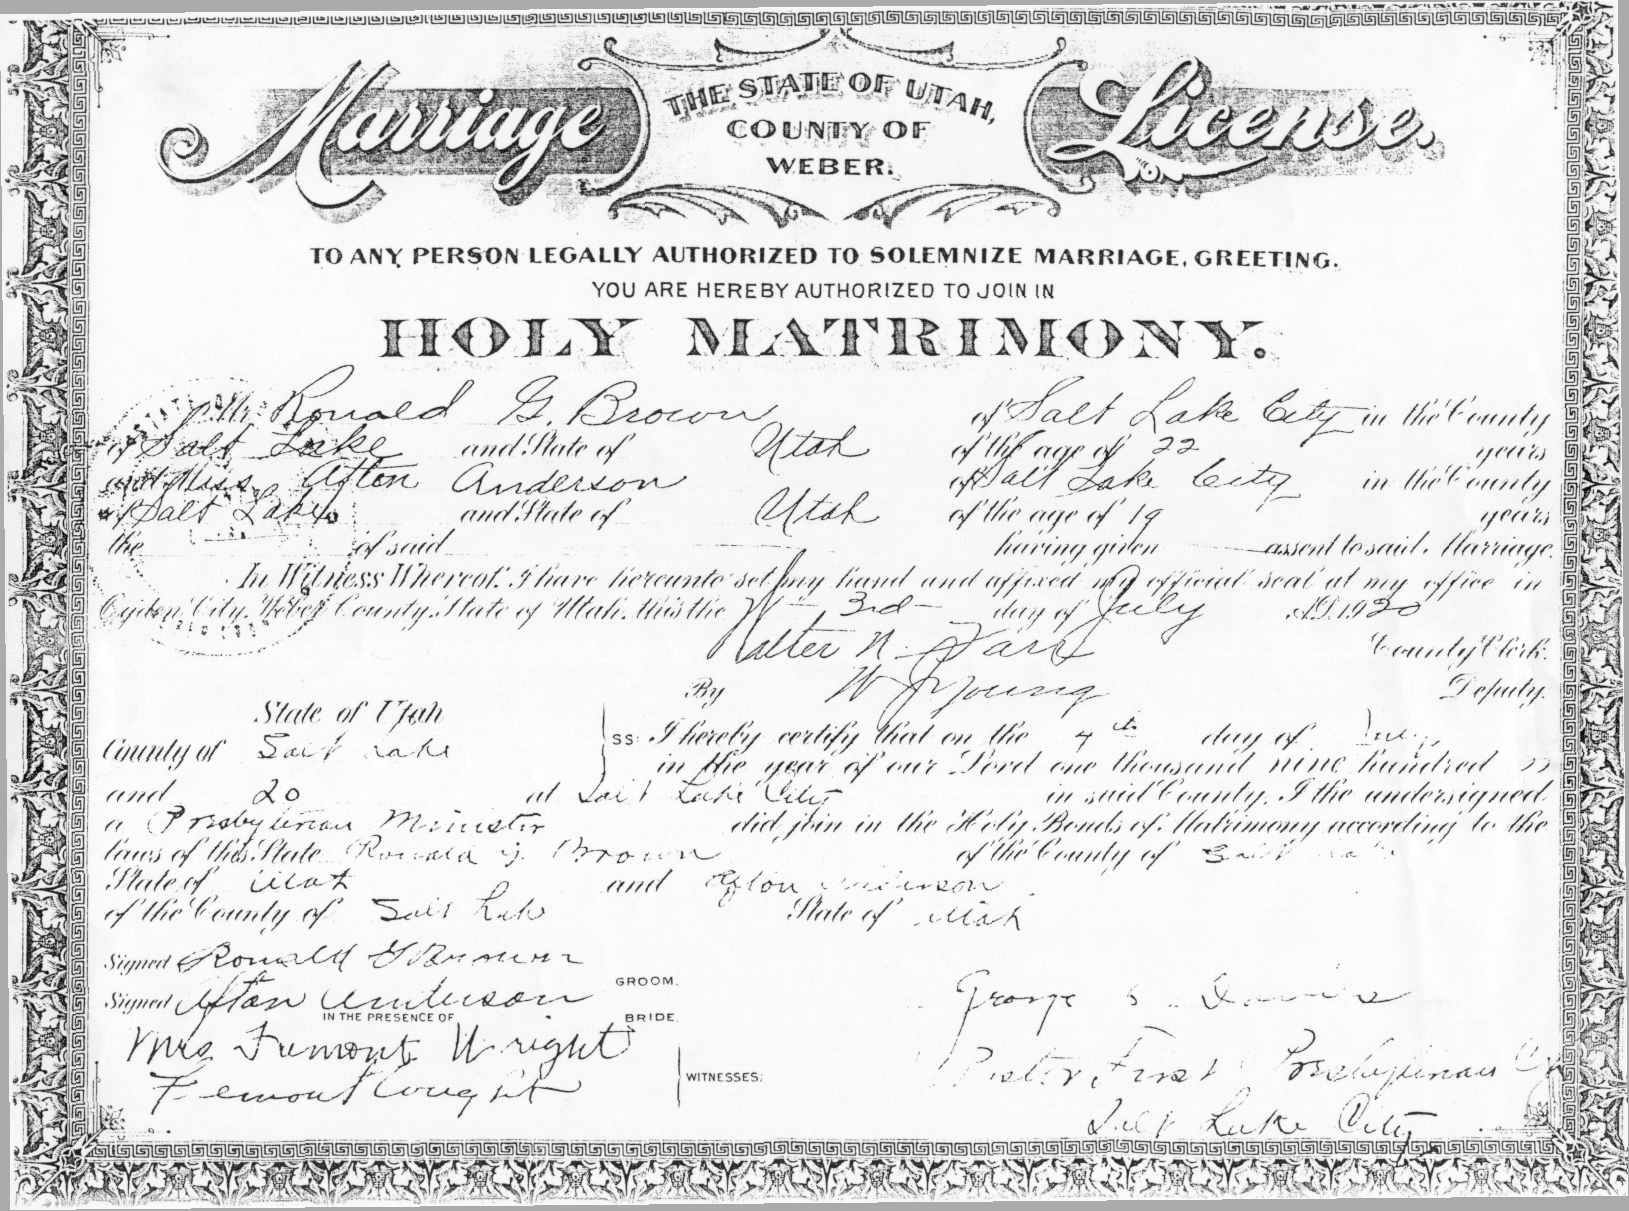 Ronald Galbraith Brown and Afton Anderson Wedding Certificate July 4, 1920